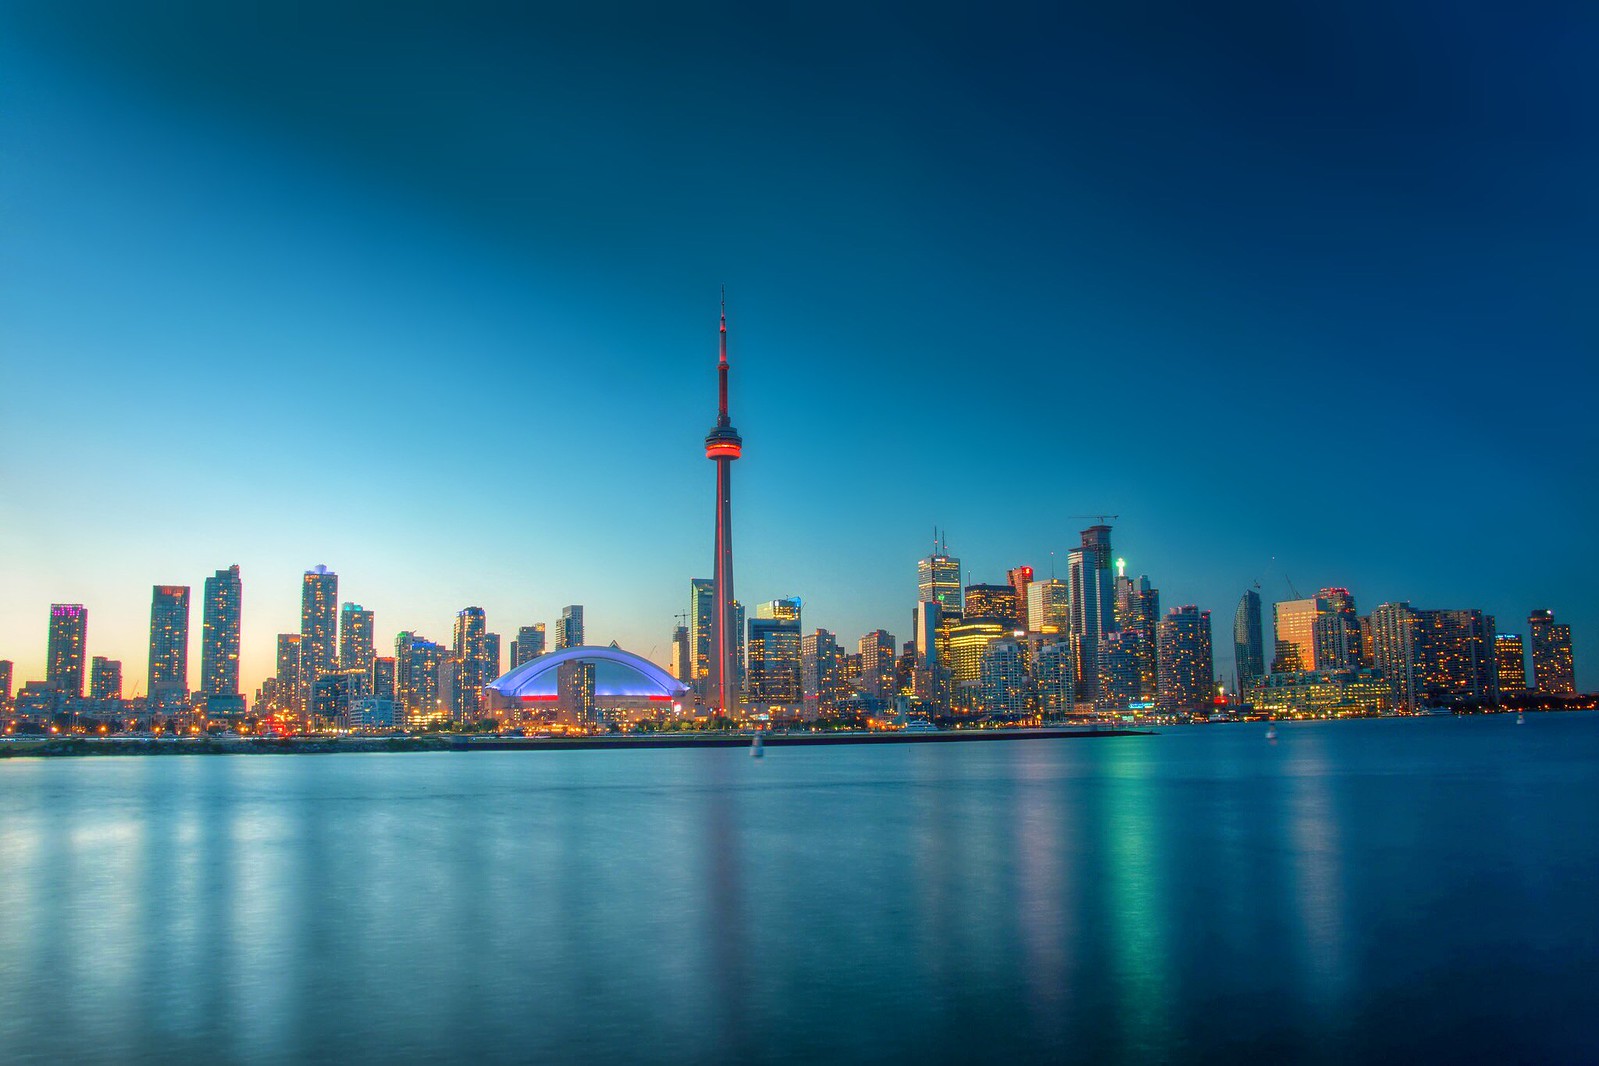 Toronto, one of the top cities to visit in Canada